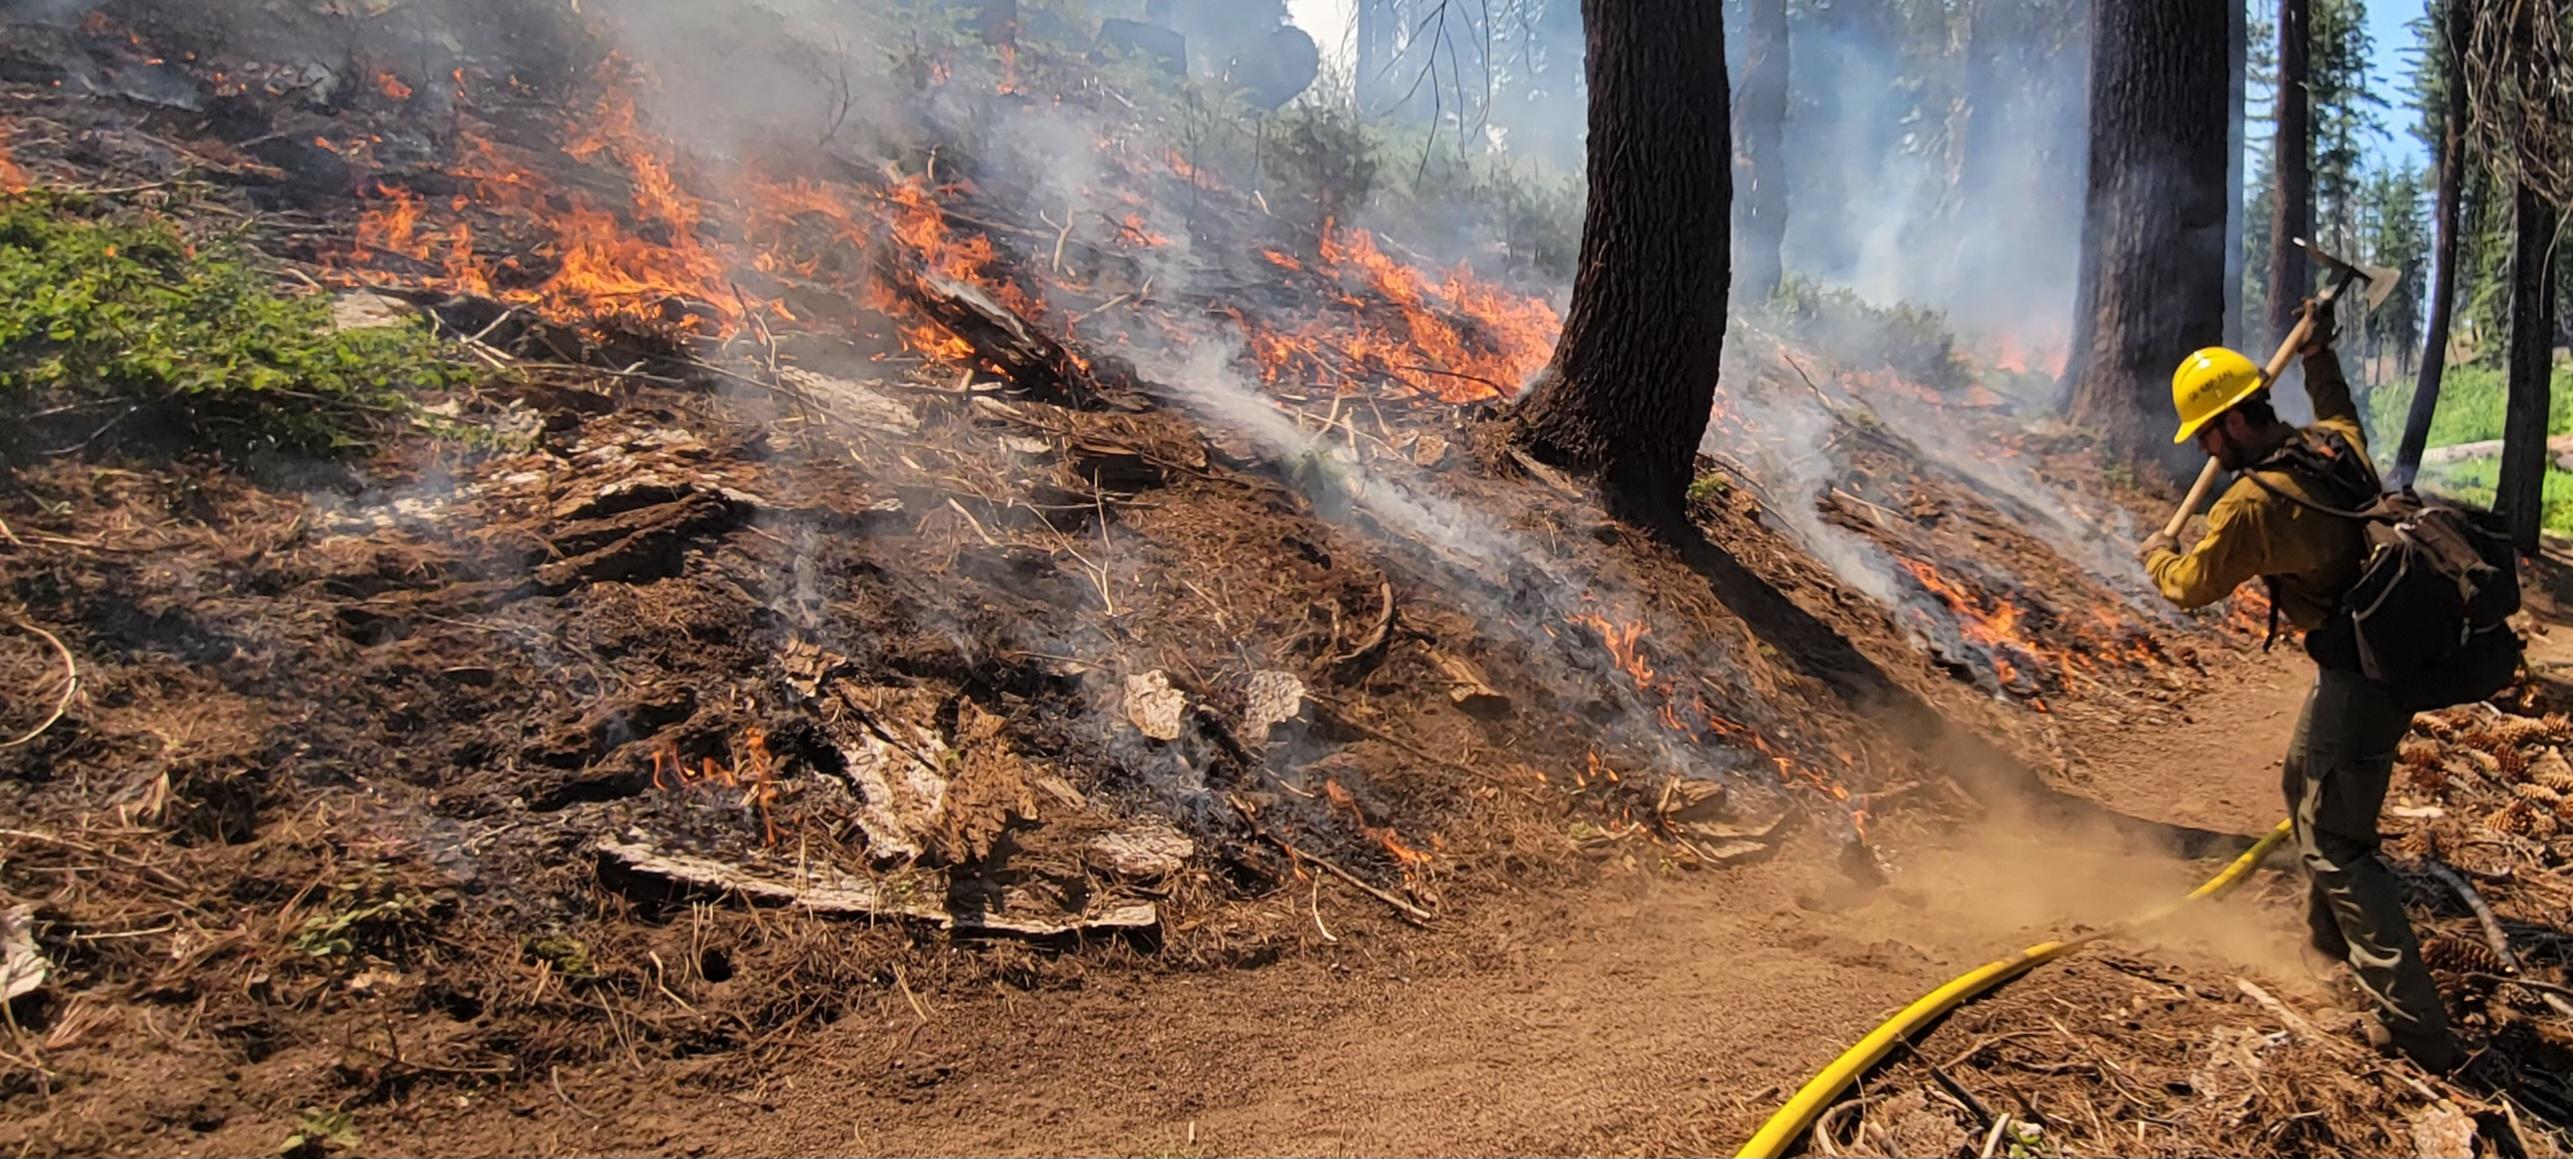 Photo of a forest with fire and smoke. There is a firefighter with a tool working on the hand line.